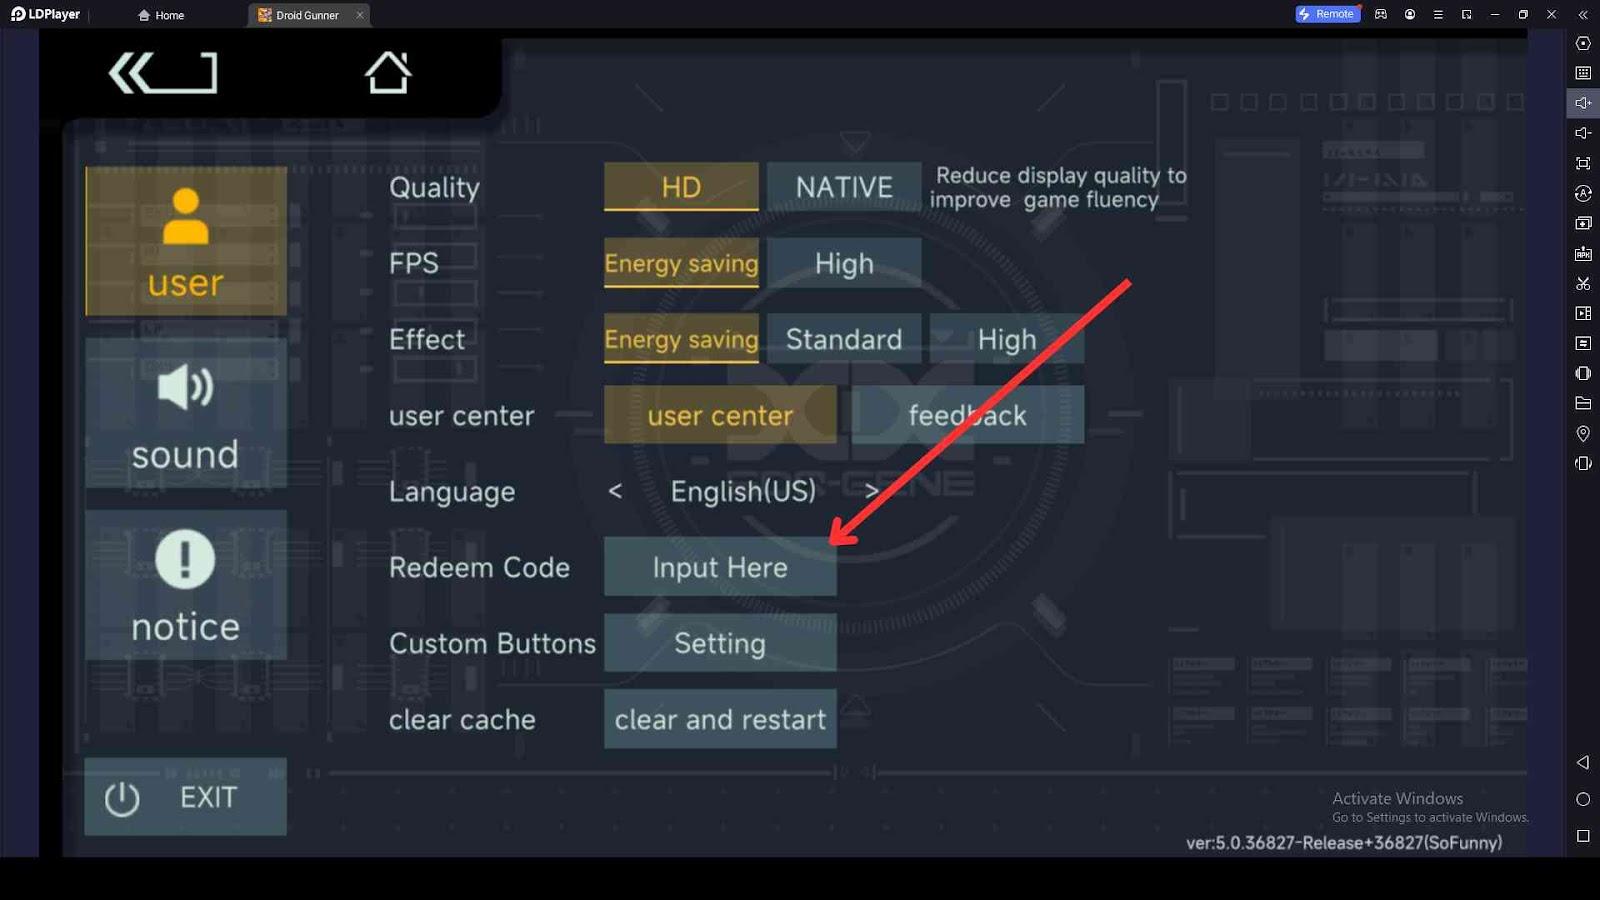 How to Redeem Codes in Droid Gunner